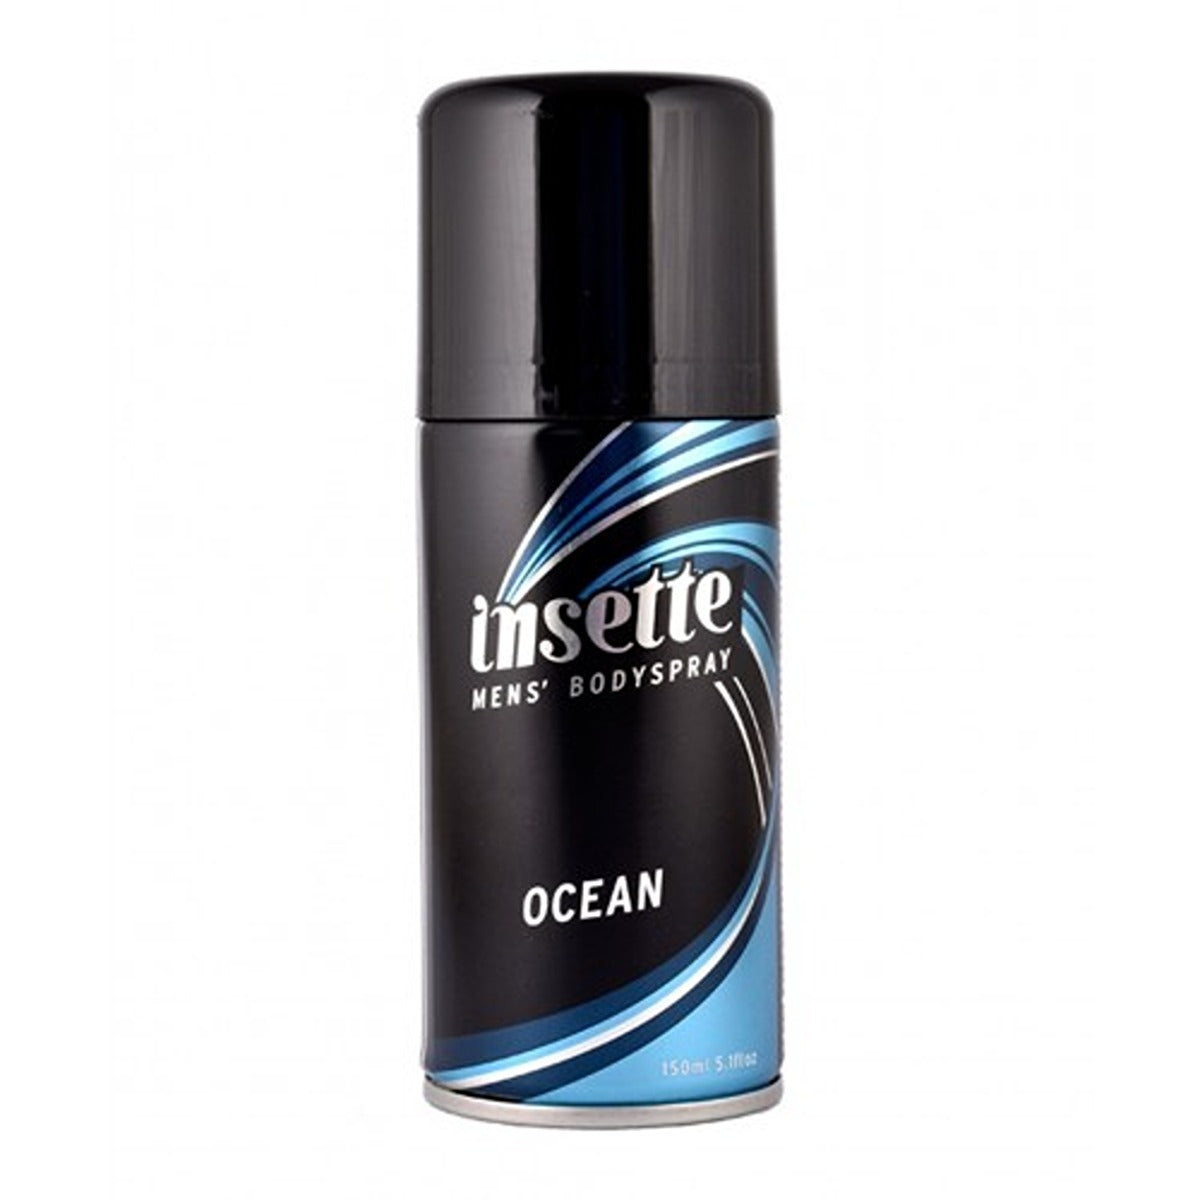 Insette - Ocean Body Spray - 150ml - Continental Food Store